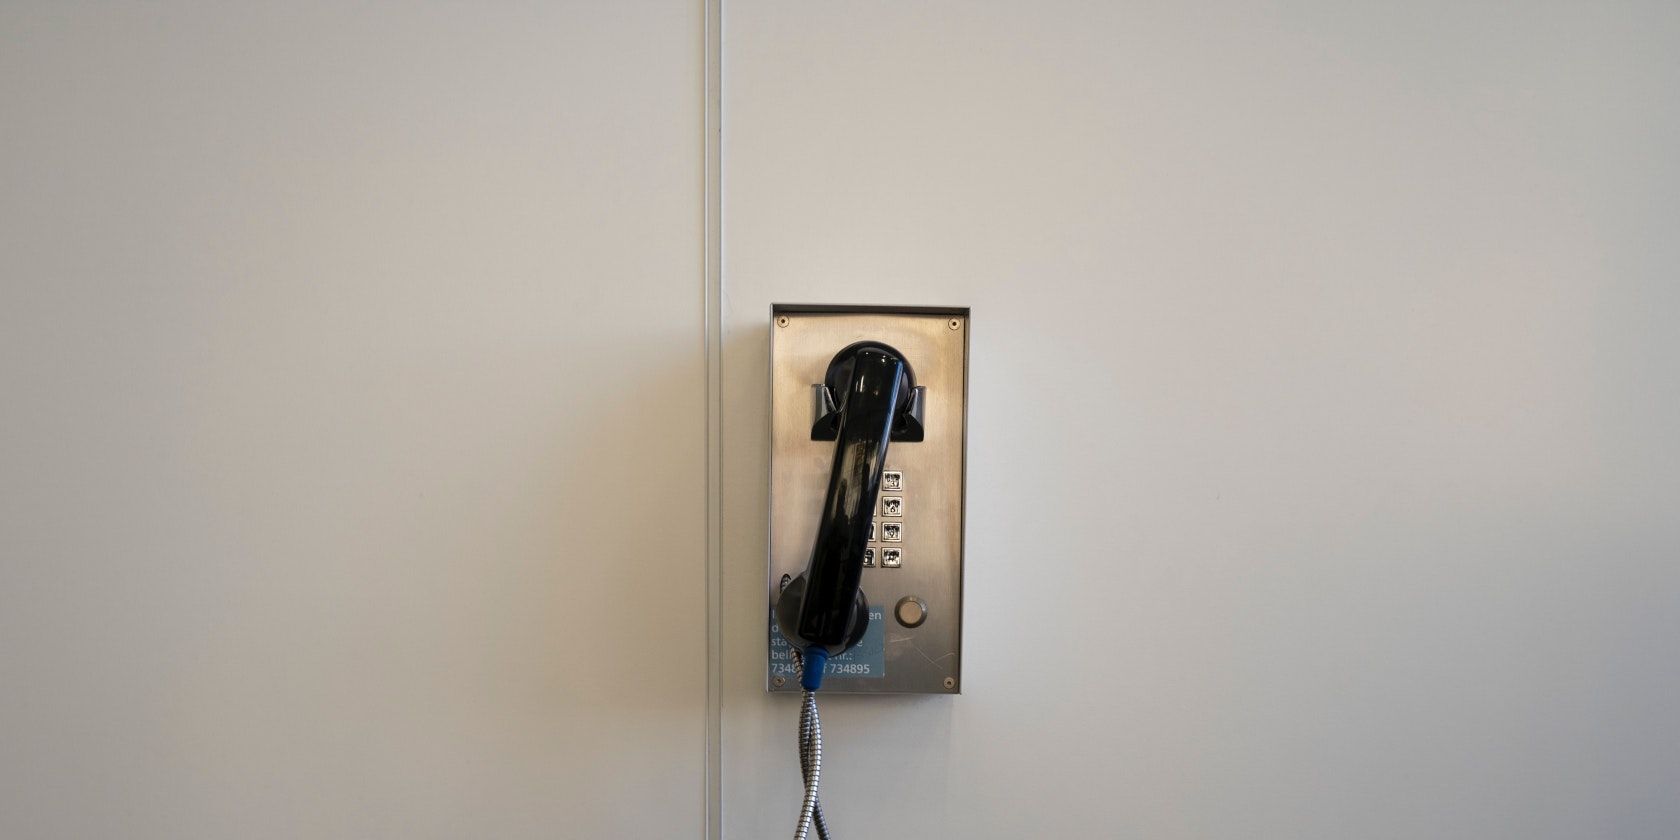 Wall pay phone on hook